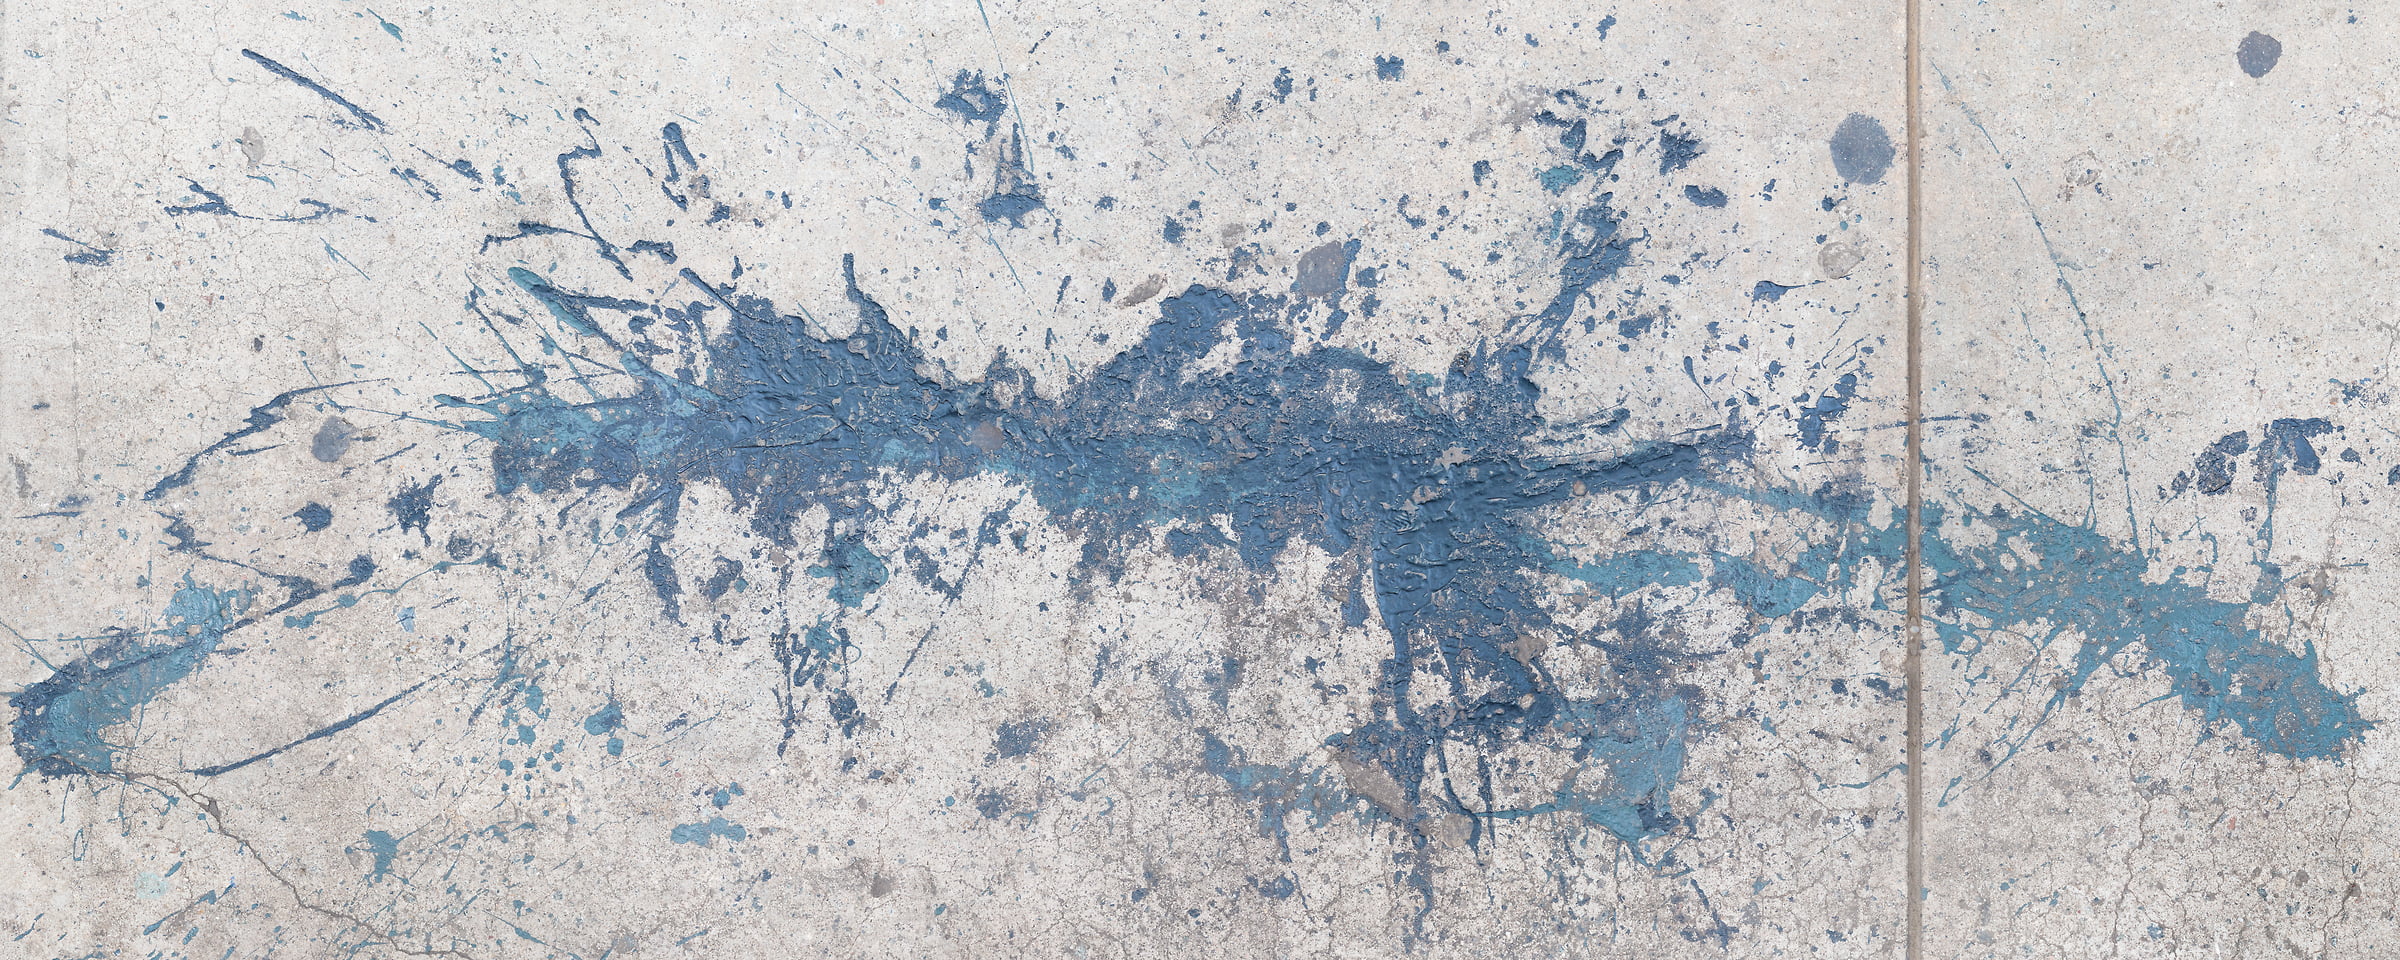 301 megapixels! A very high resolution, large-format VAST photo print of paint splattered on the New York City sidewalk that looks like a Jackson Pollock painting; fine art photograph created by Dan Piech in Manhattan, New York City